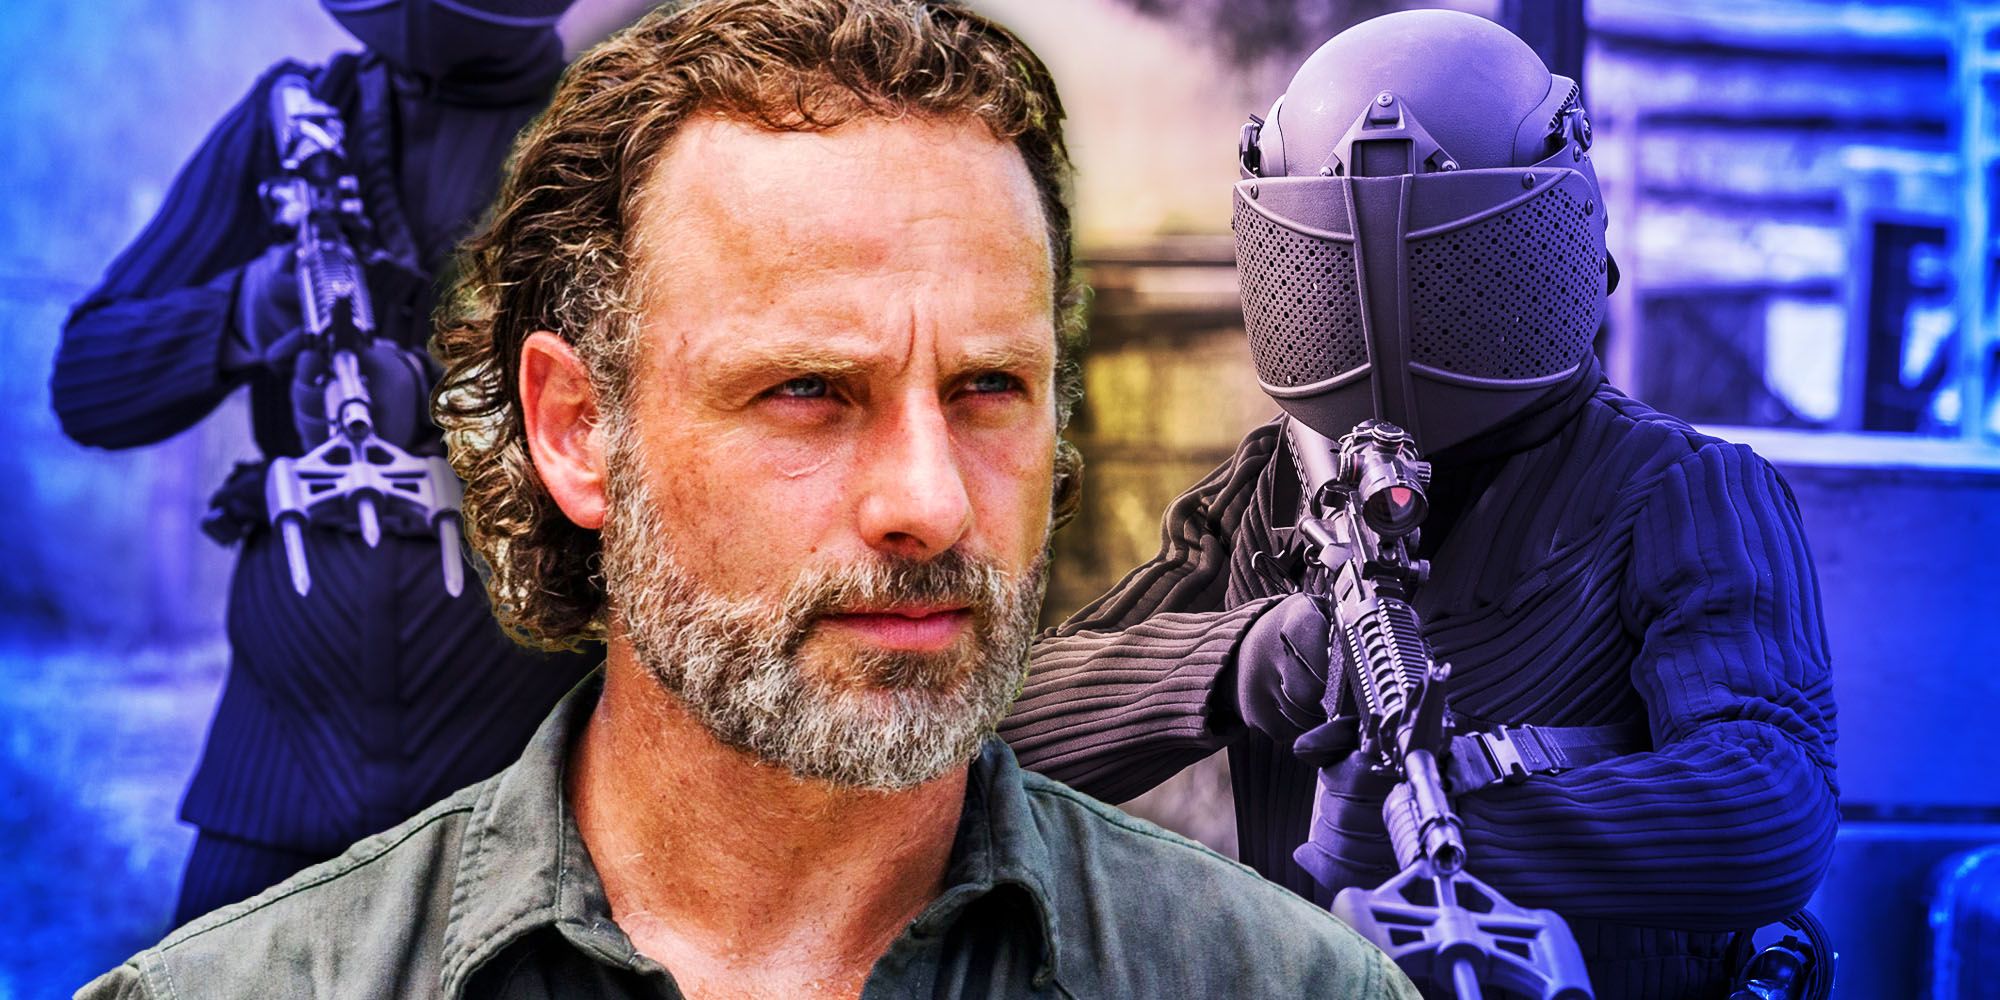 Walking Dead: What The Writing On Rick Grimes' iPhone Means